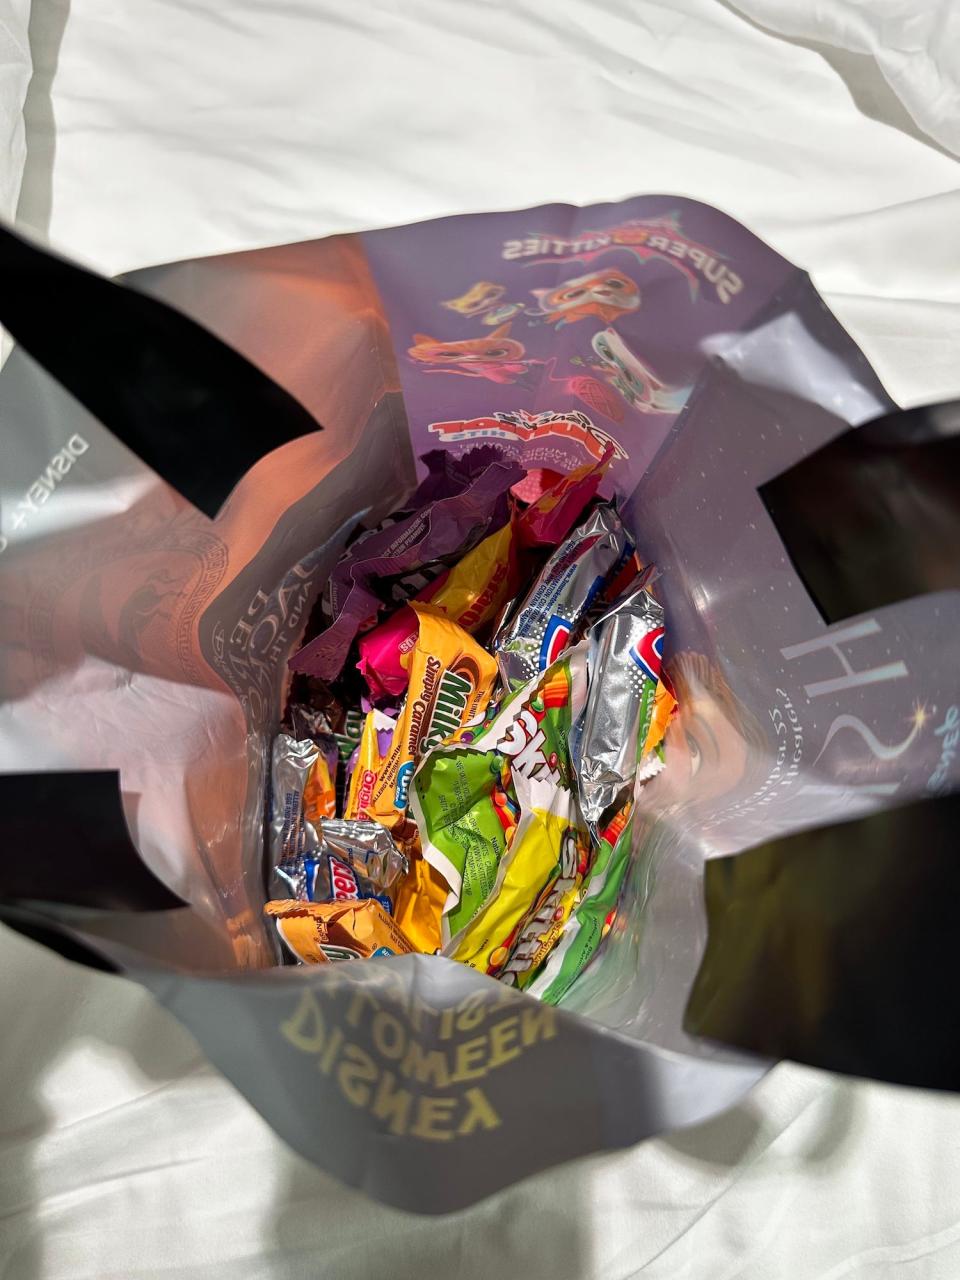 The candy bag we received during the Trick or Treat portion of the Disney Wish 2023 cruise.